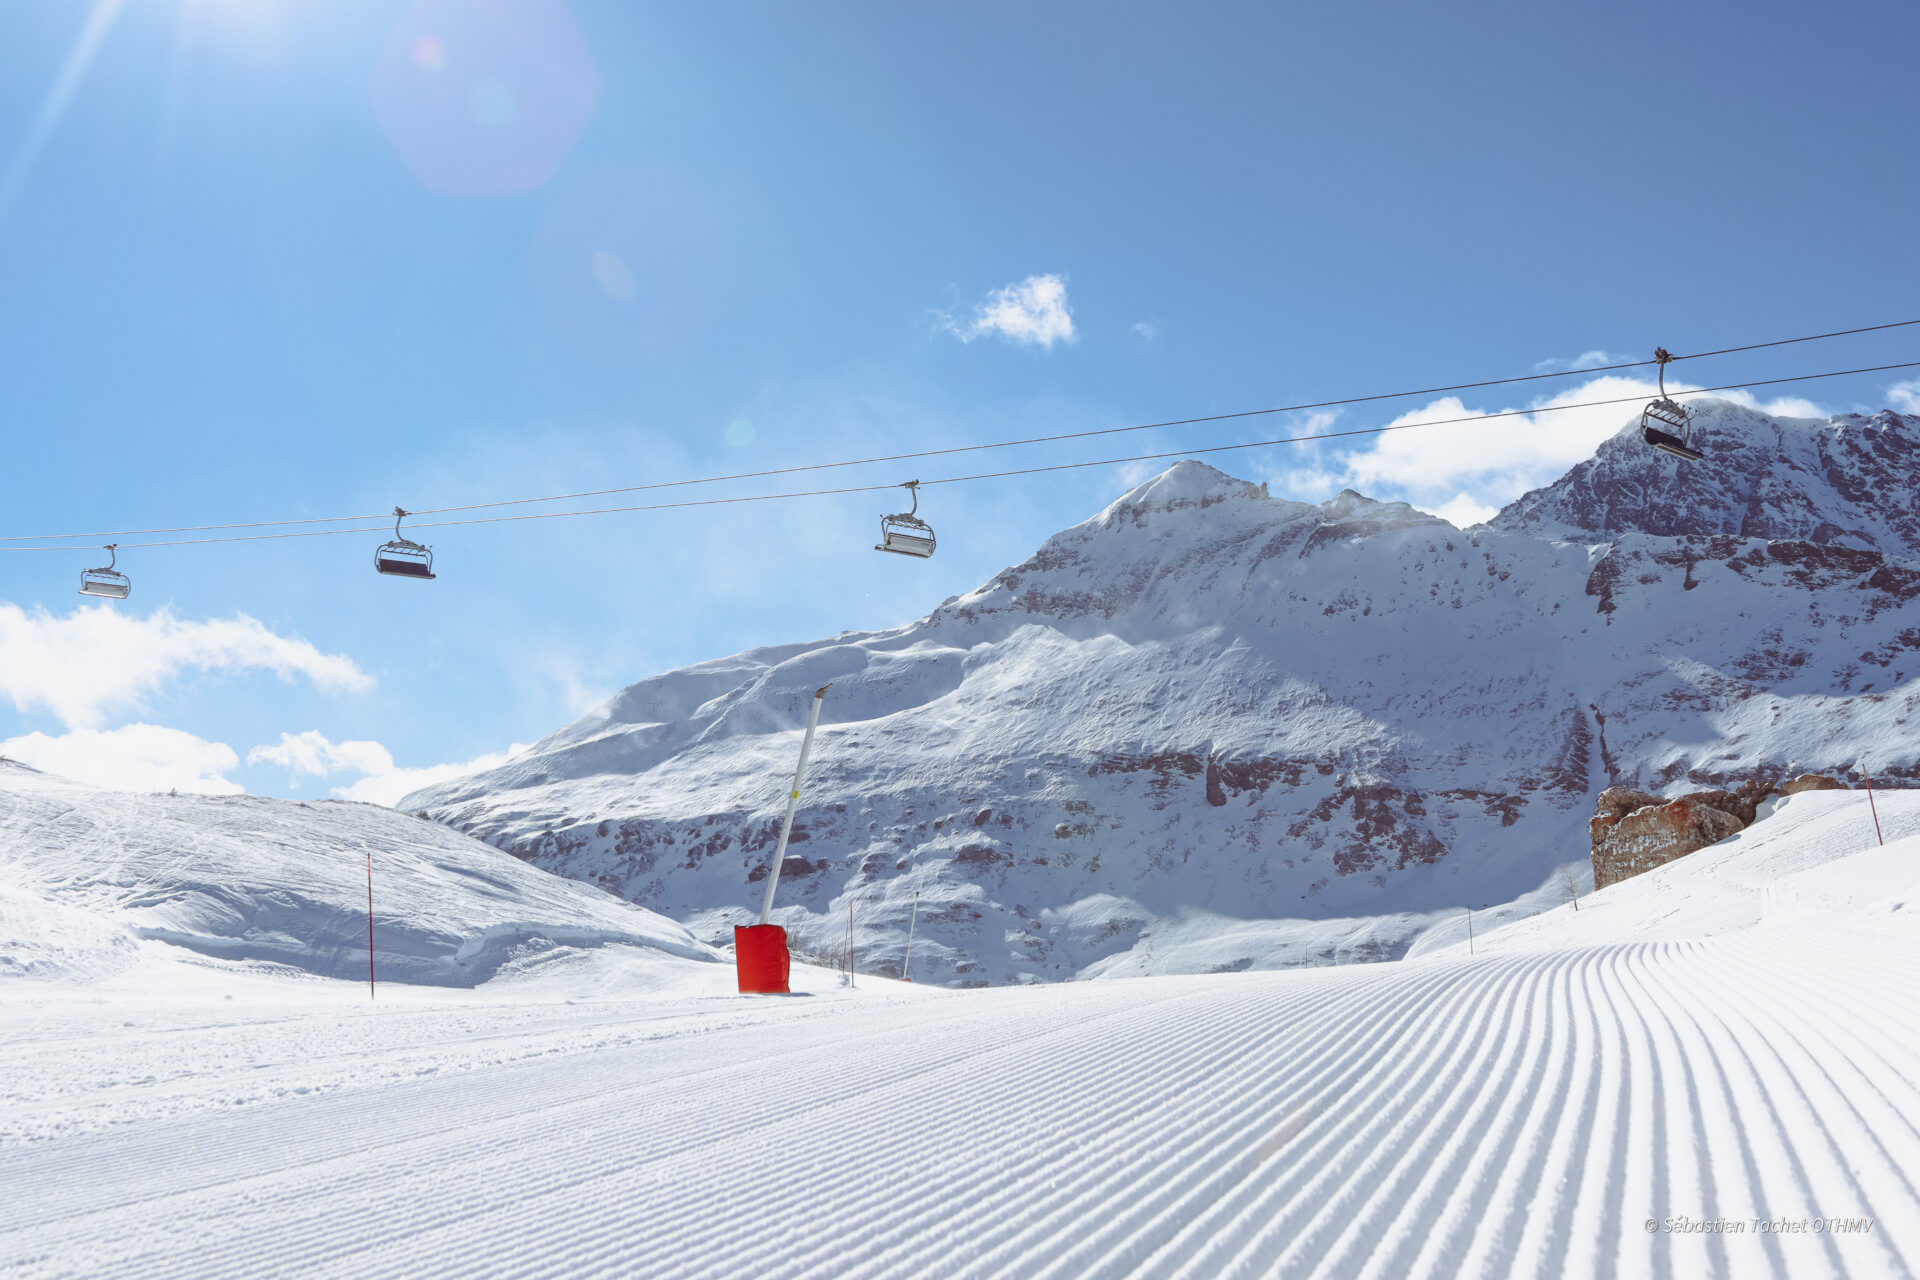 An image of the groomed pistes in Val Cenis